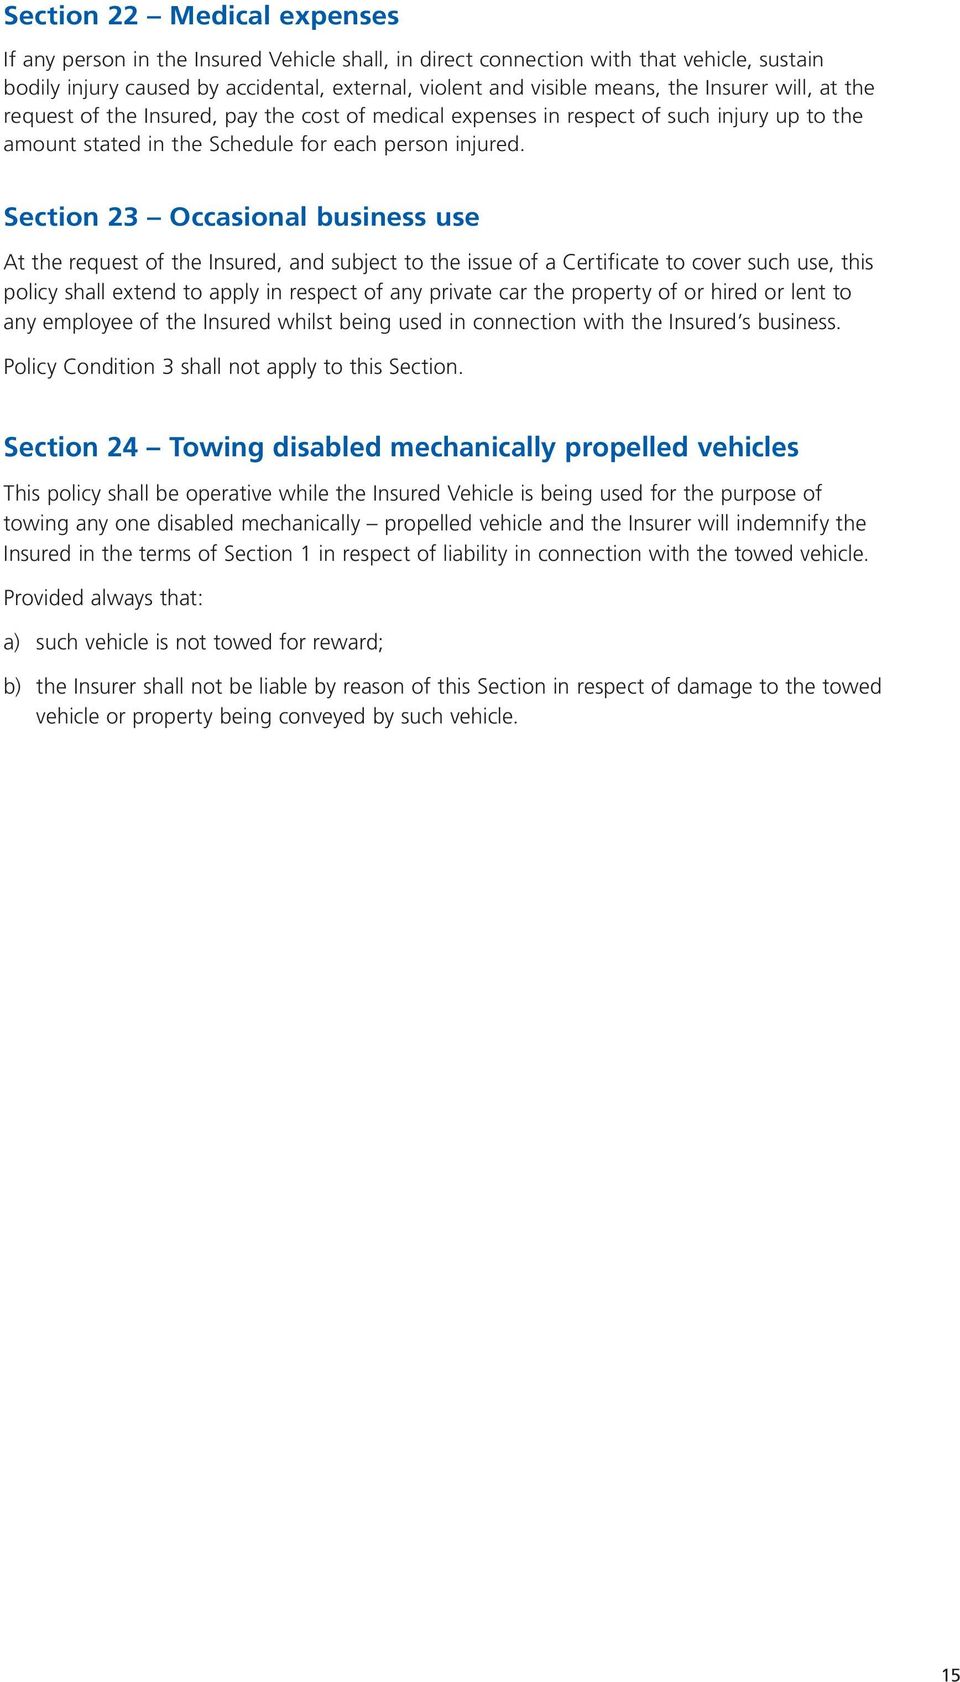 Section 23 Occasional business use At the request of the Insured, and subject to the issue of a Certificate to cover such use, this policy shall extend to apply in respect of any private car the